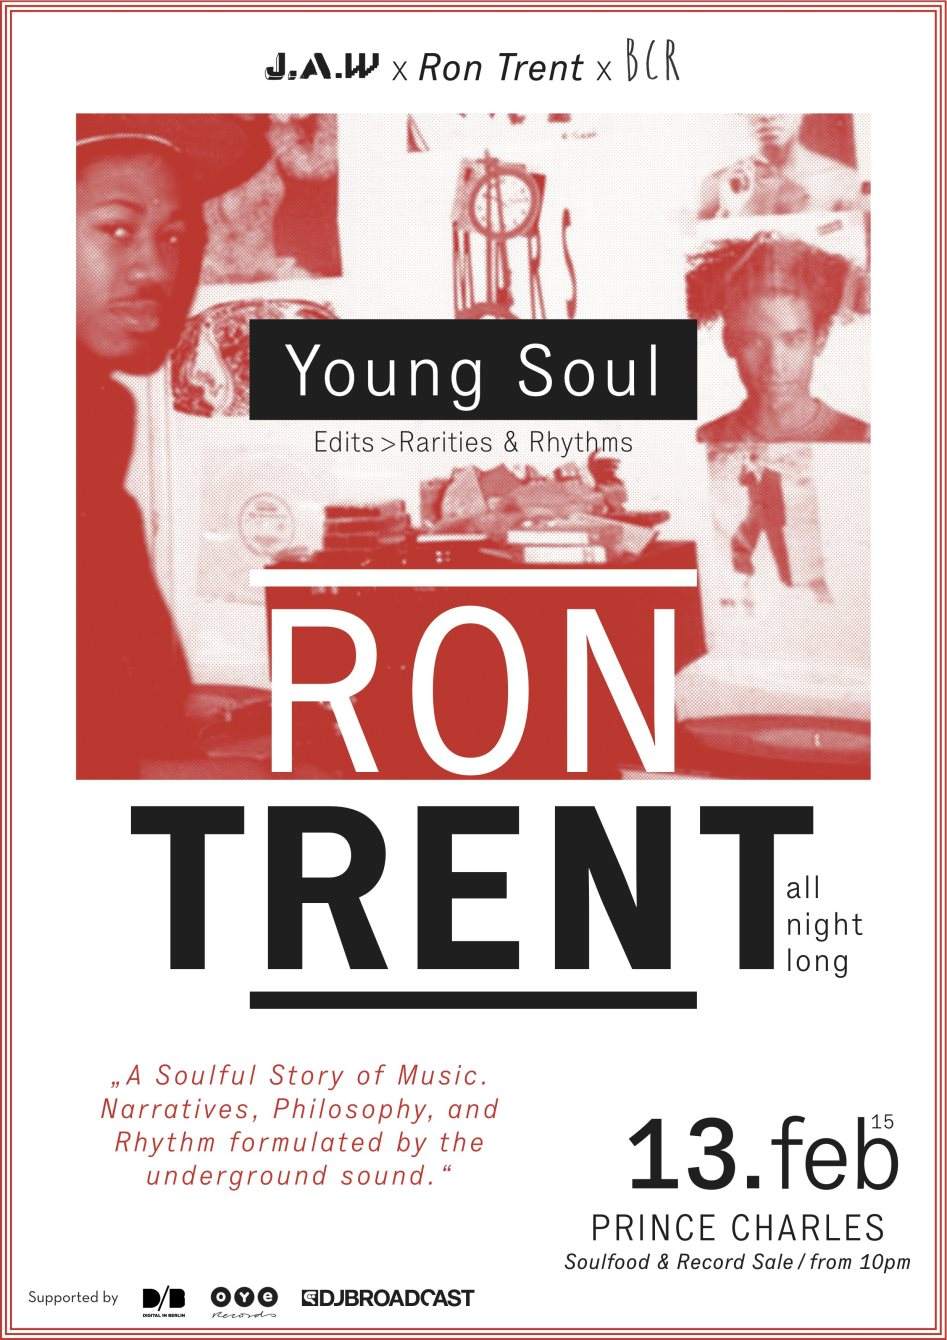 Young Soul (Edits>rarities&rhythms) with Ron Trent all Night Long - Página frontal